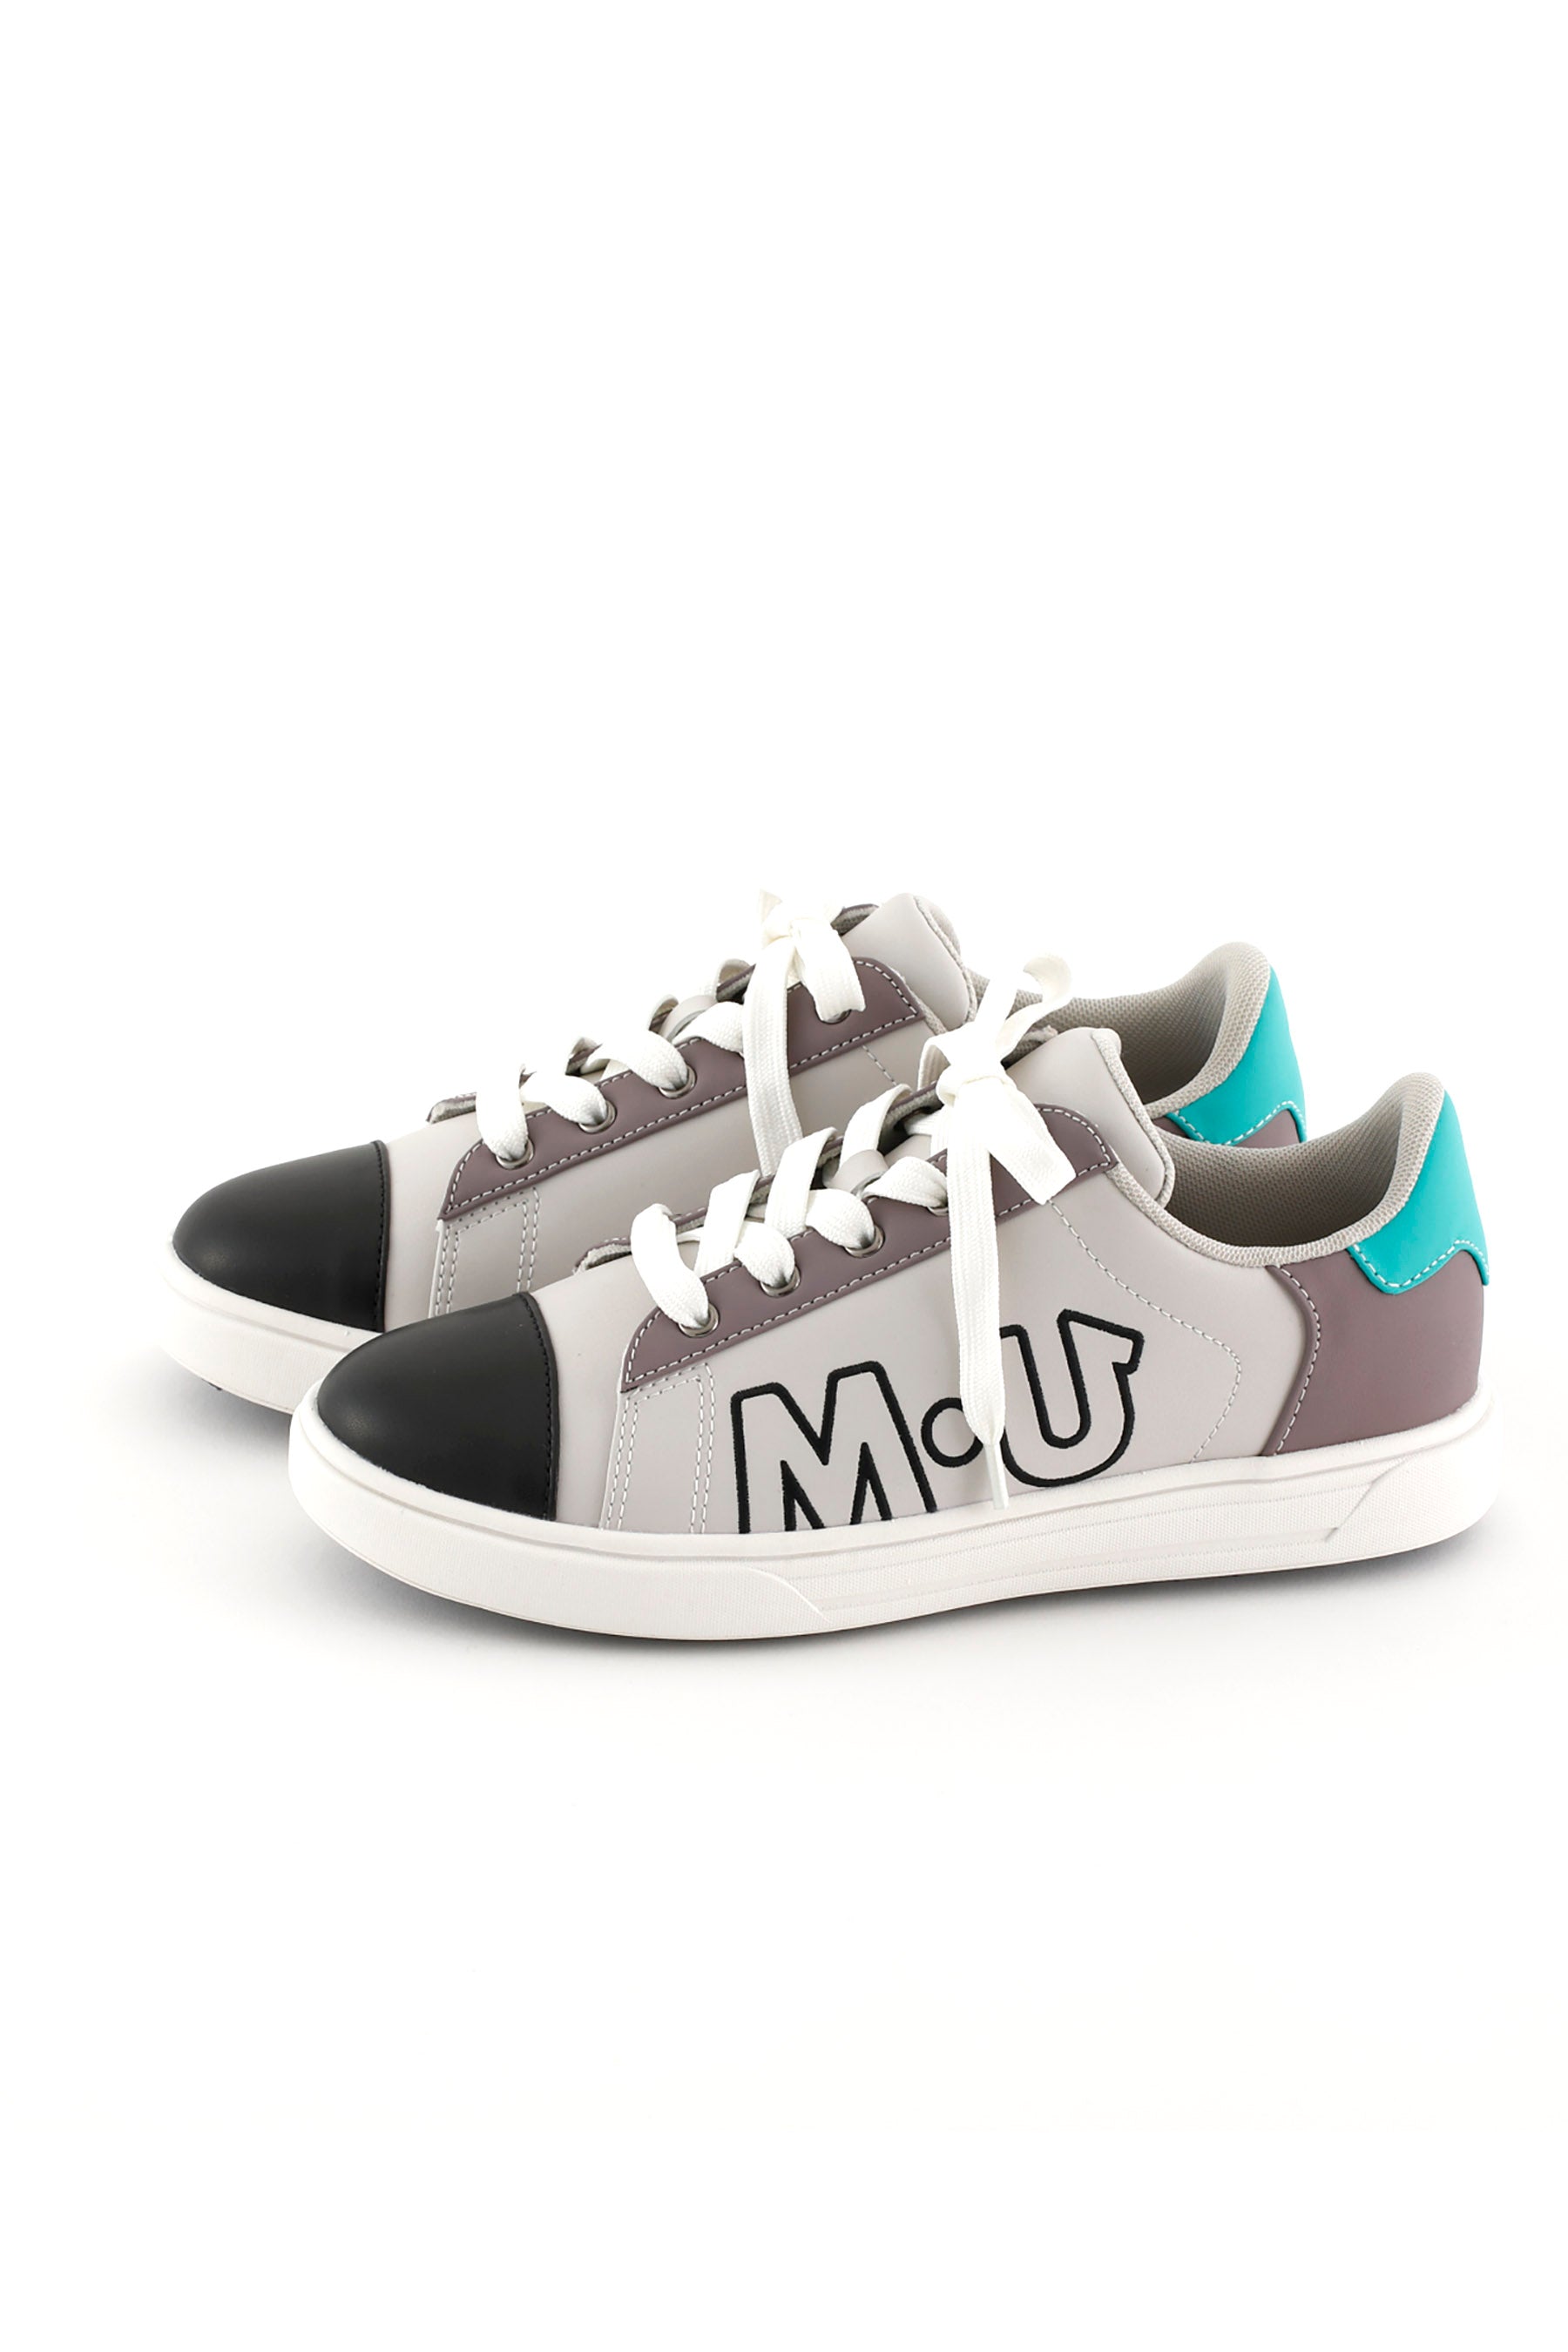 Multi-nuance color spikeless shoes (703Q1600)